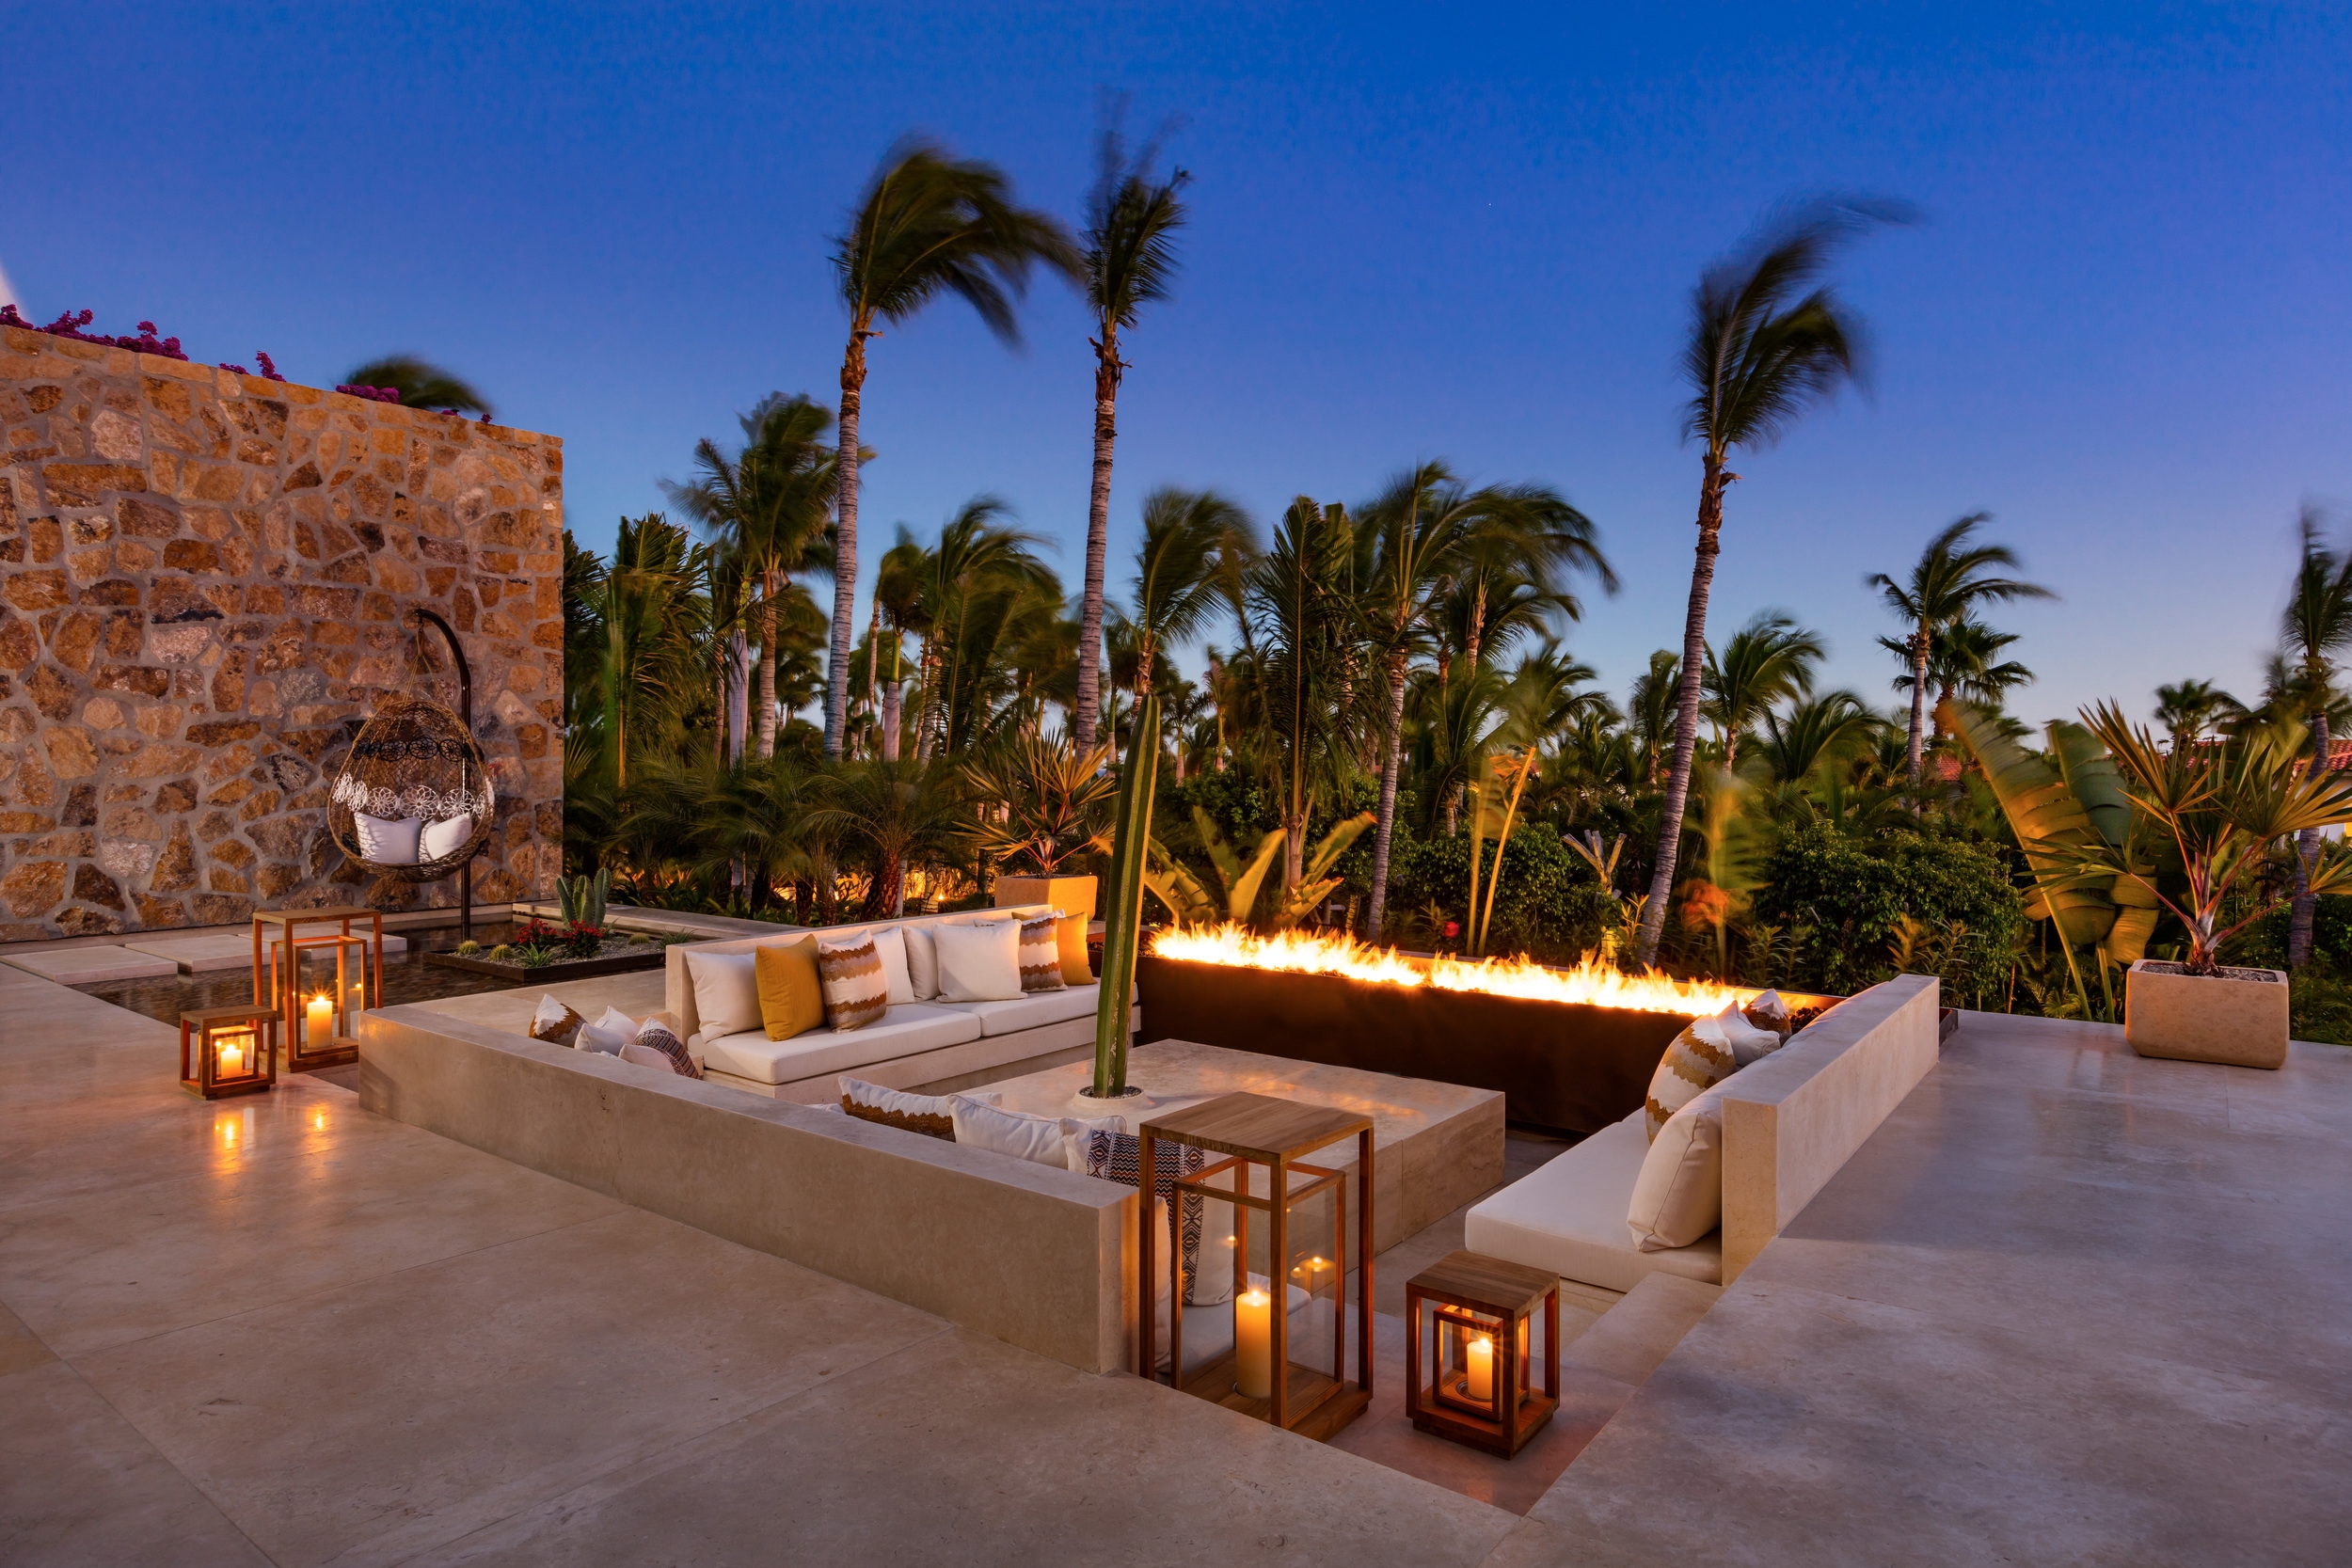 Villa One at One&Only Palmilla